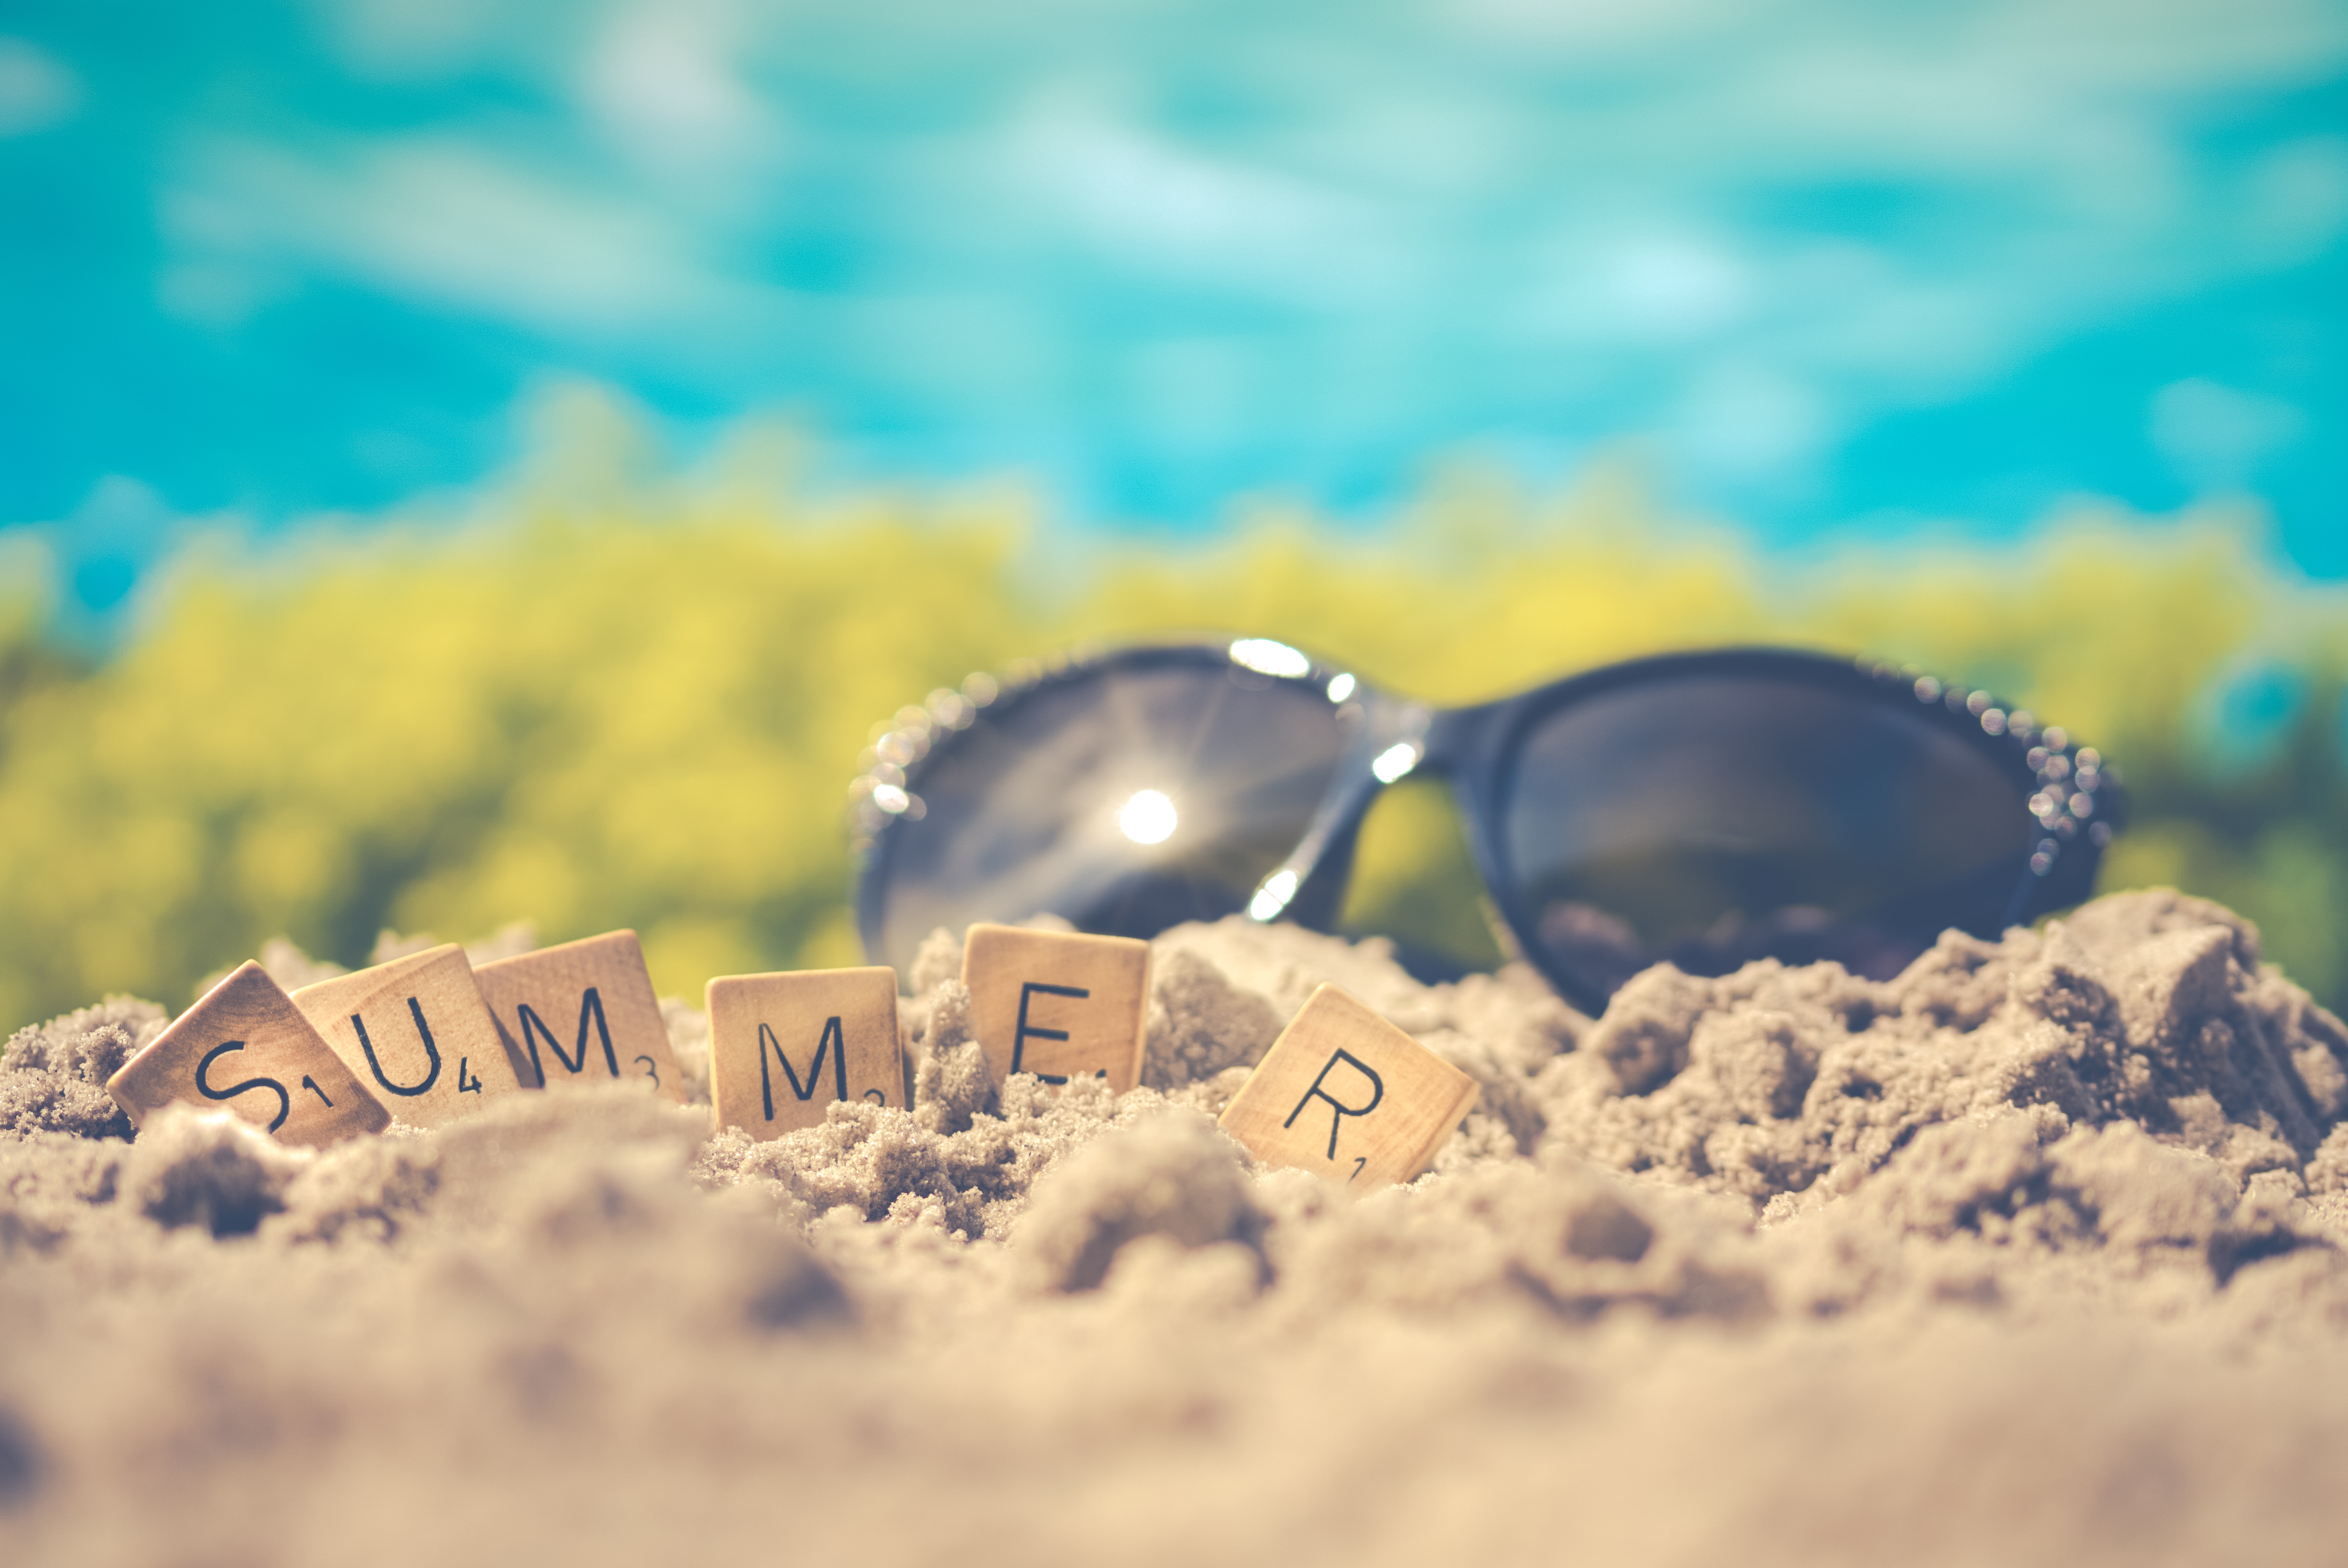 The word summer spelled out with Scrabble letters, sitting in pile of sand with sunglasses in the background